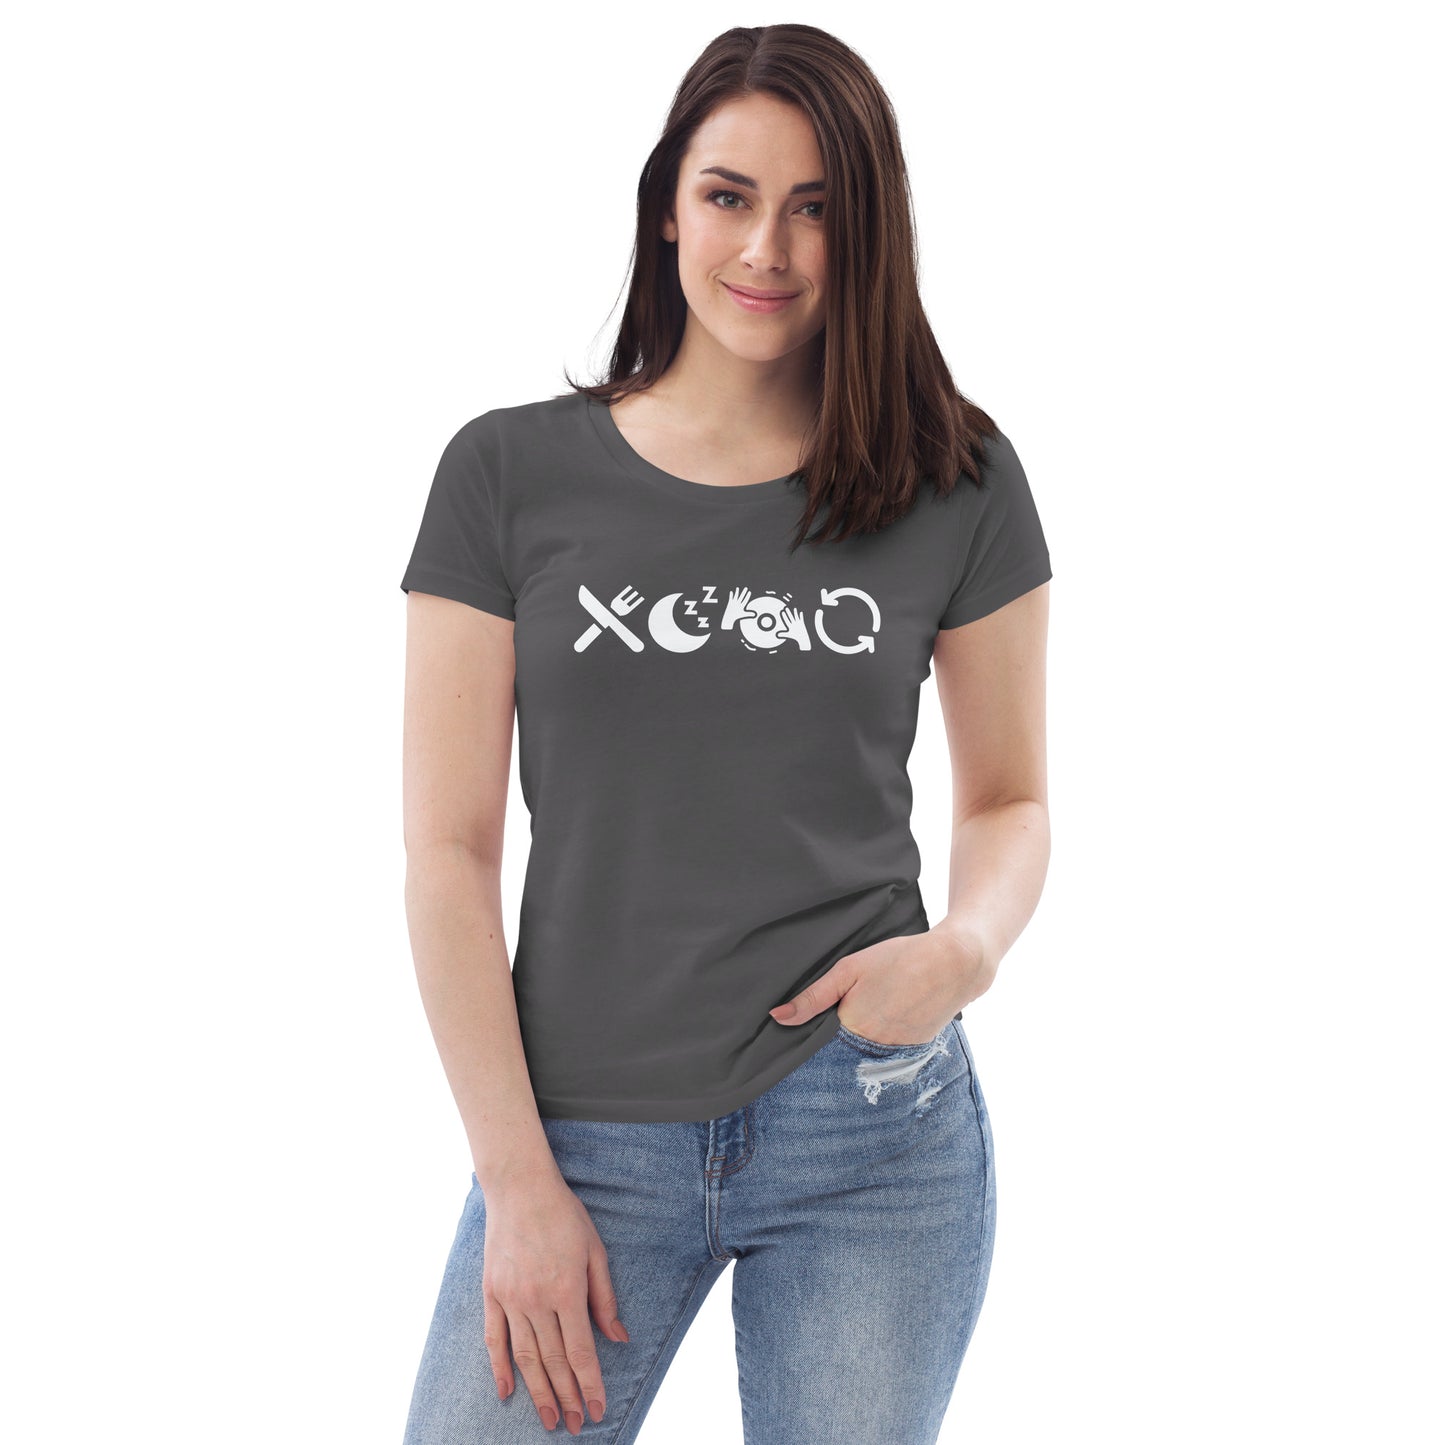 Eat Sleep Rave Repeat (icons) - Women's Fitted T-Shirt